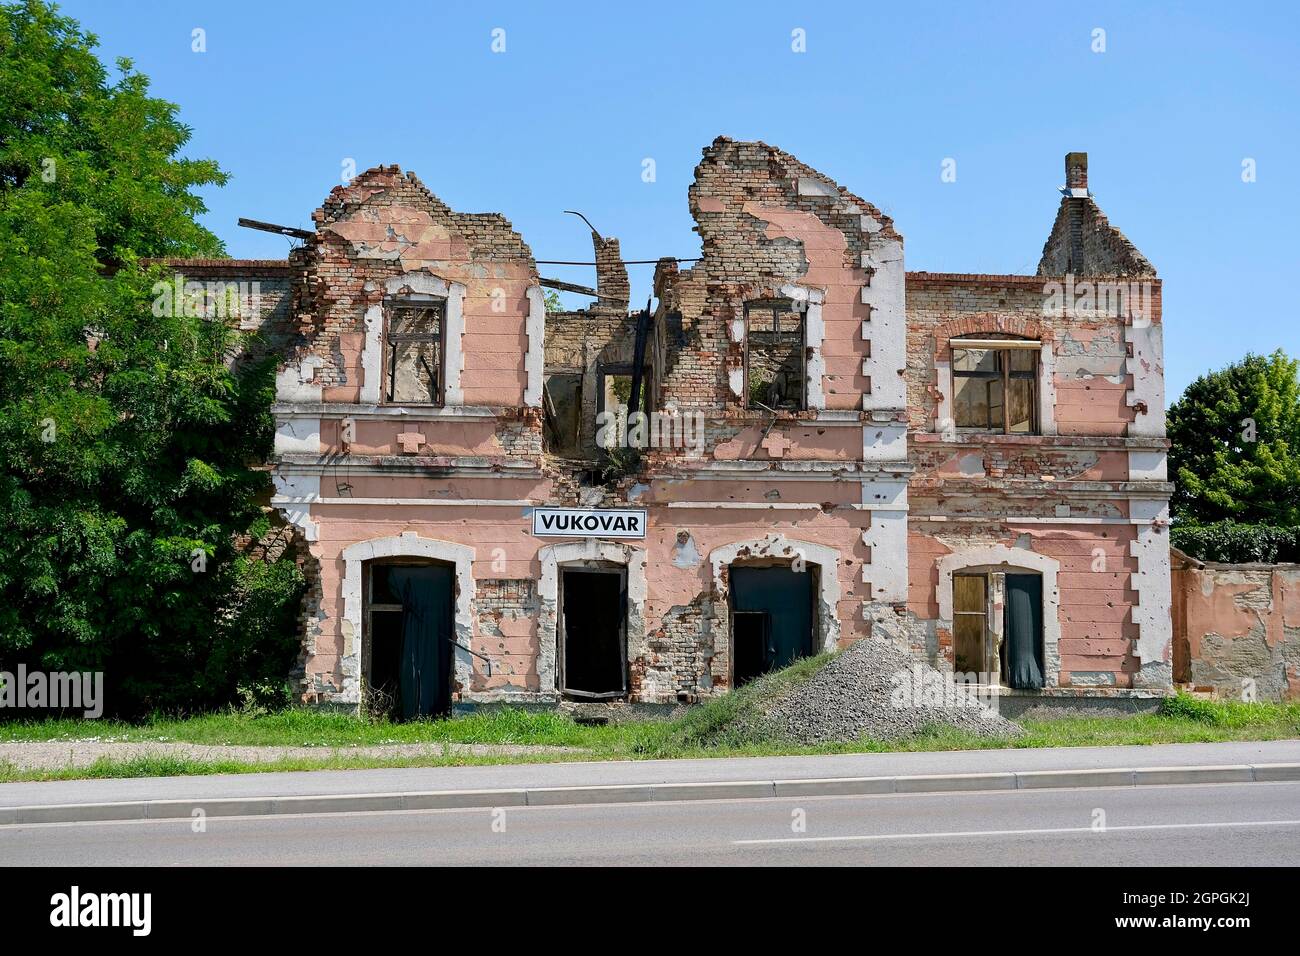 Croatia, Slavonia, Vukovar, facade of the ruined station after the siege of Vukovar between August and November 1991 Stock Photo